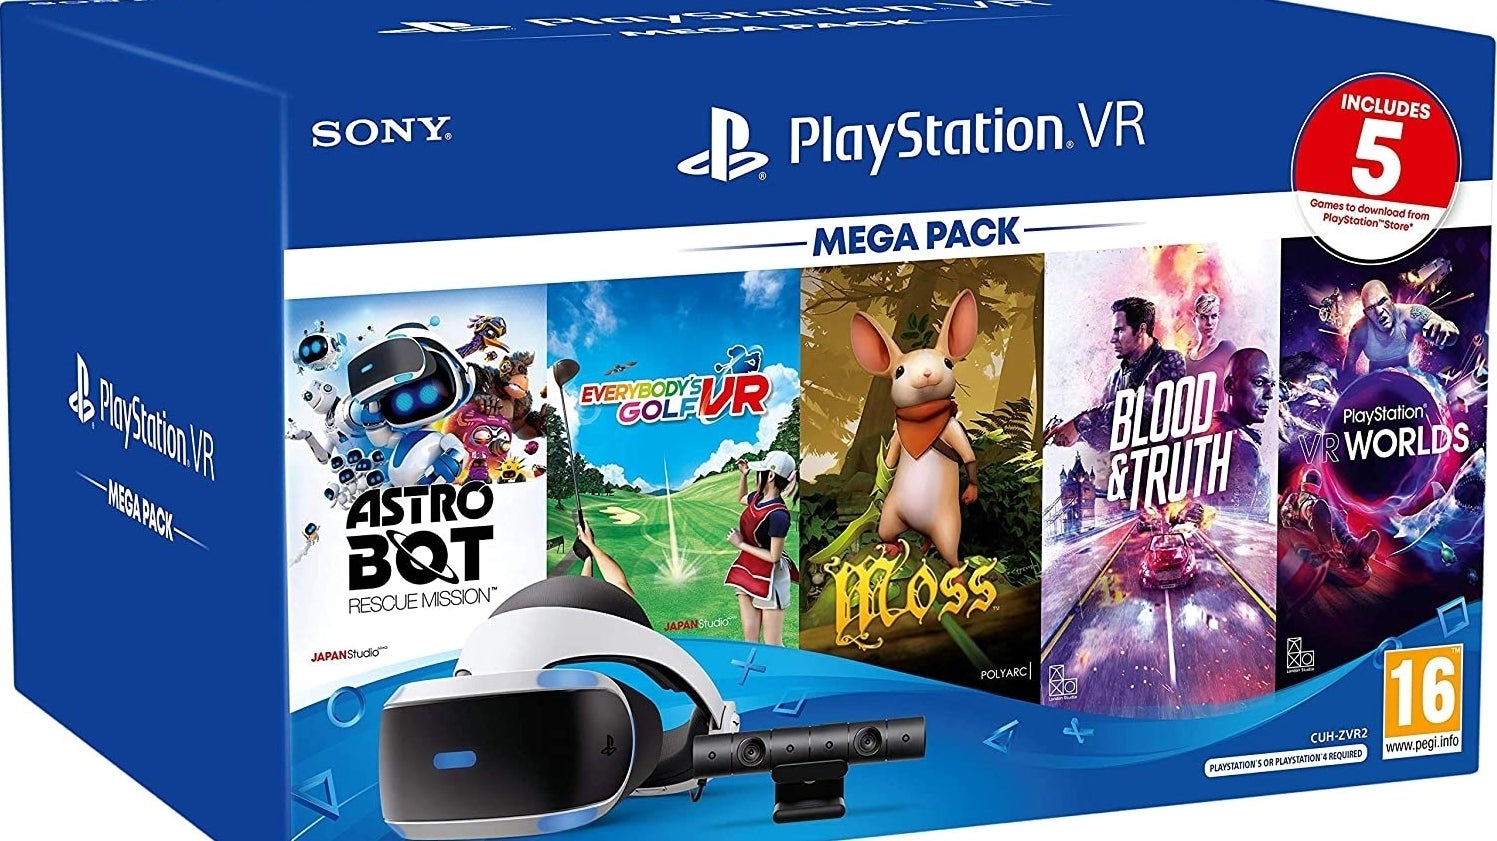 PlayStation VR MEGA PACK (CUH-ZVR2) - 家庭用ゲーム本体